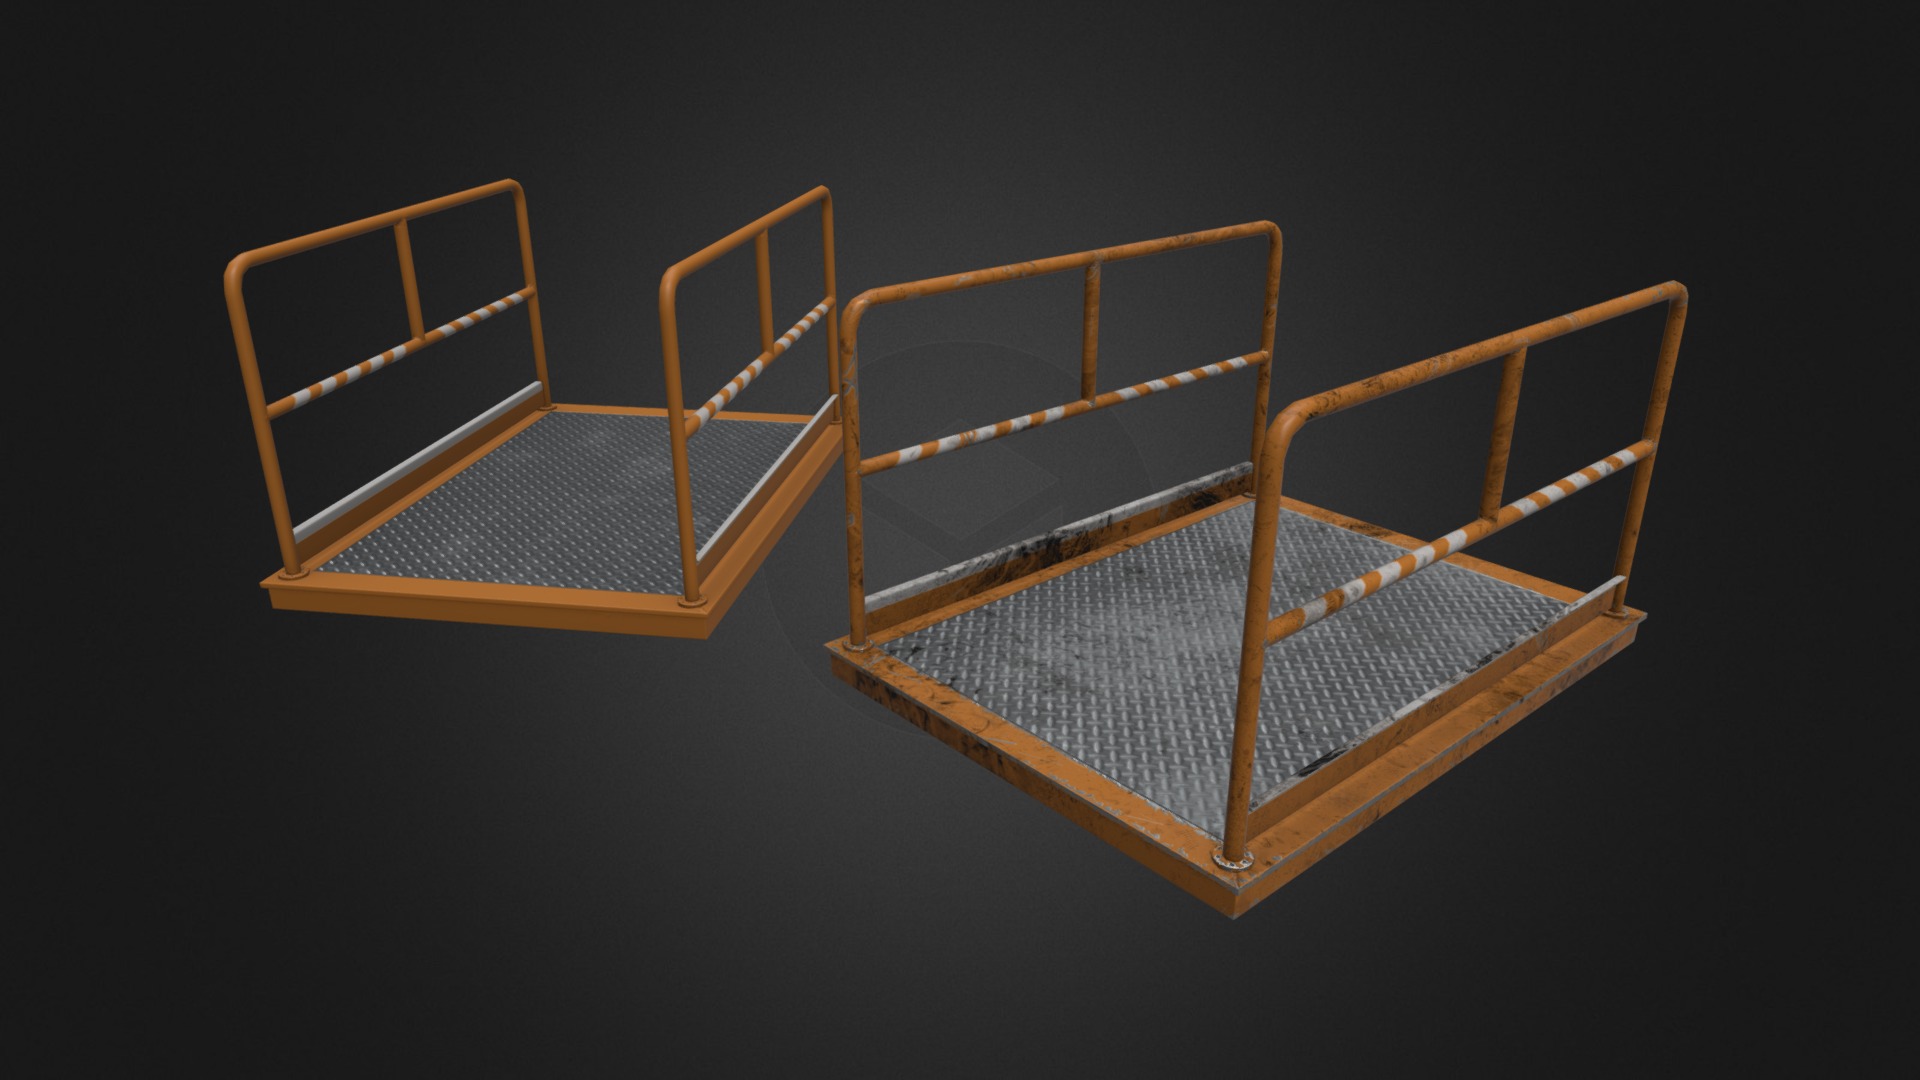 3D model Lift 3 - This is a 3D model of the Lift 3. The 3D model is about a few wooden chairs.